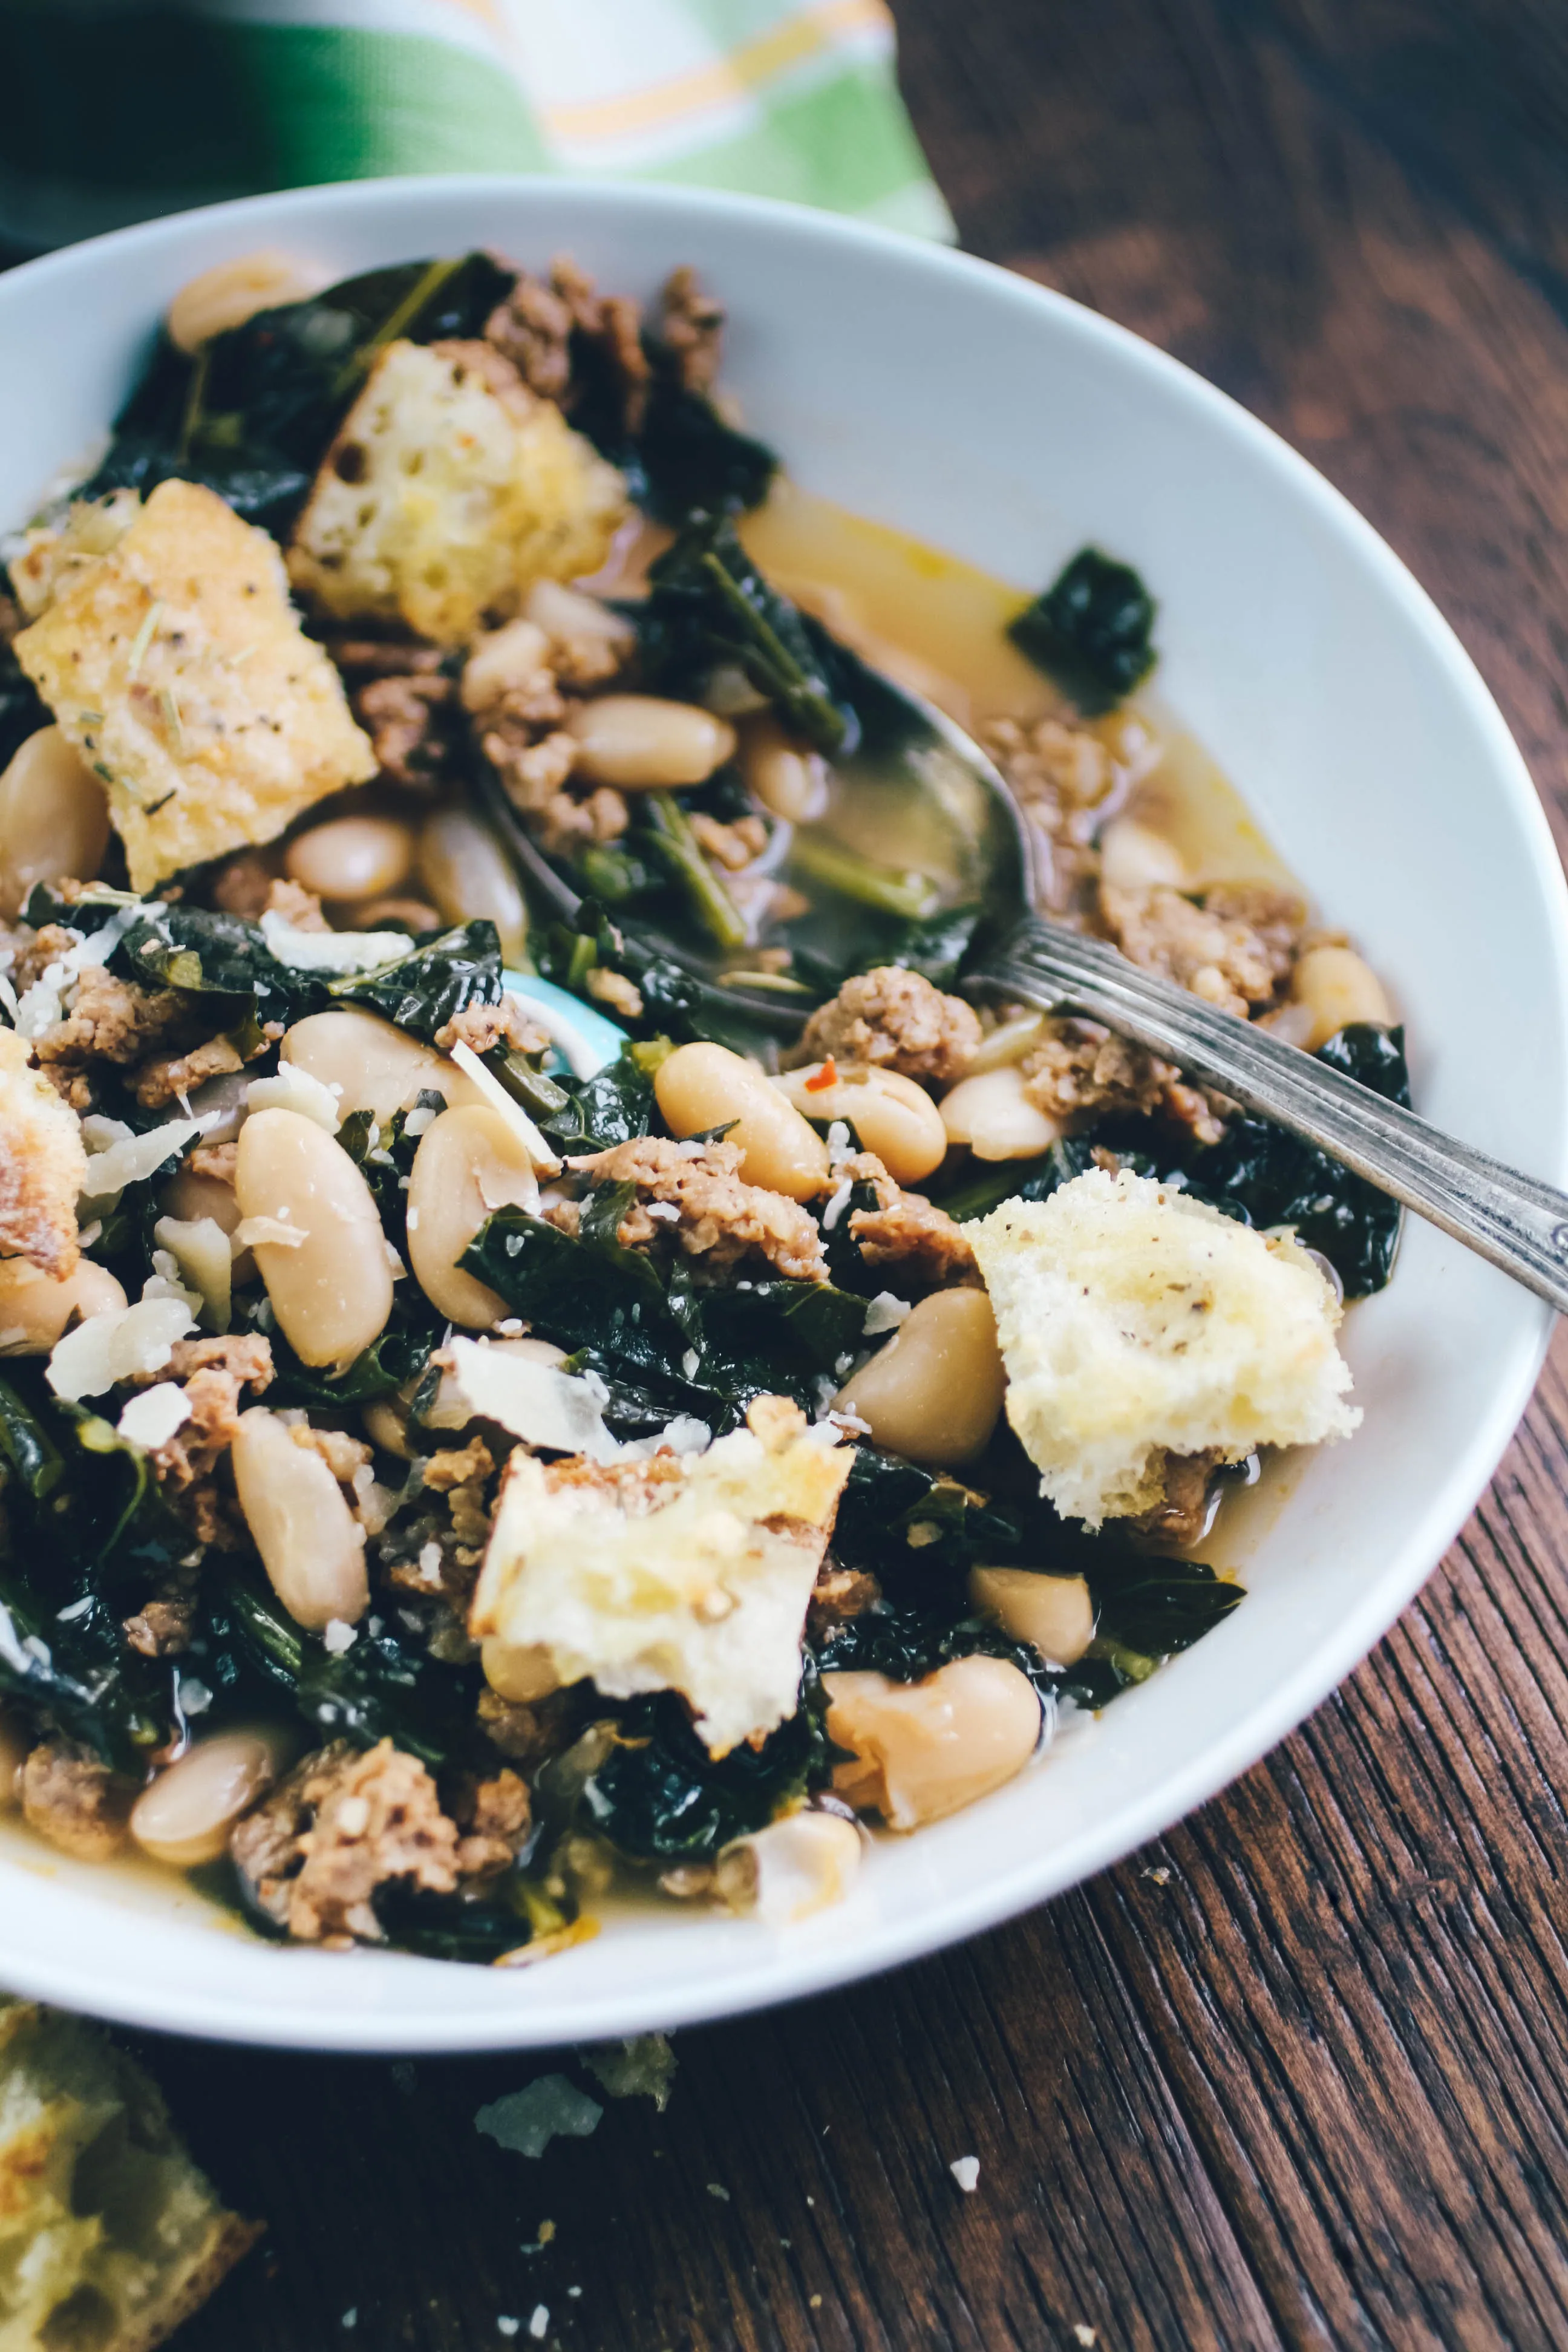 Sausage, Kale, and White Bean Soup with Rosemary-Parmesan Croutons is a dish for any night of the week. Sausage, Kale, and White Bean Soup with Rosemary-Parmesan Croutons is easy to make and it's super-satisfying! Make a batch of Sausage, Kale, and White Bean Soup with Rosemary-Parmesan Croutons tonight!